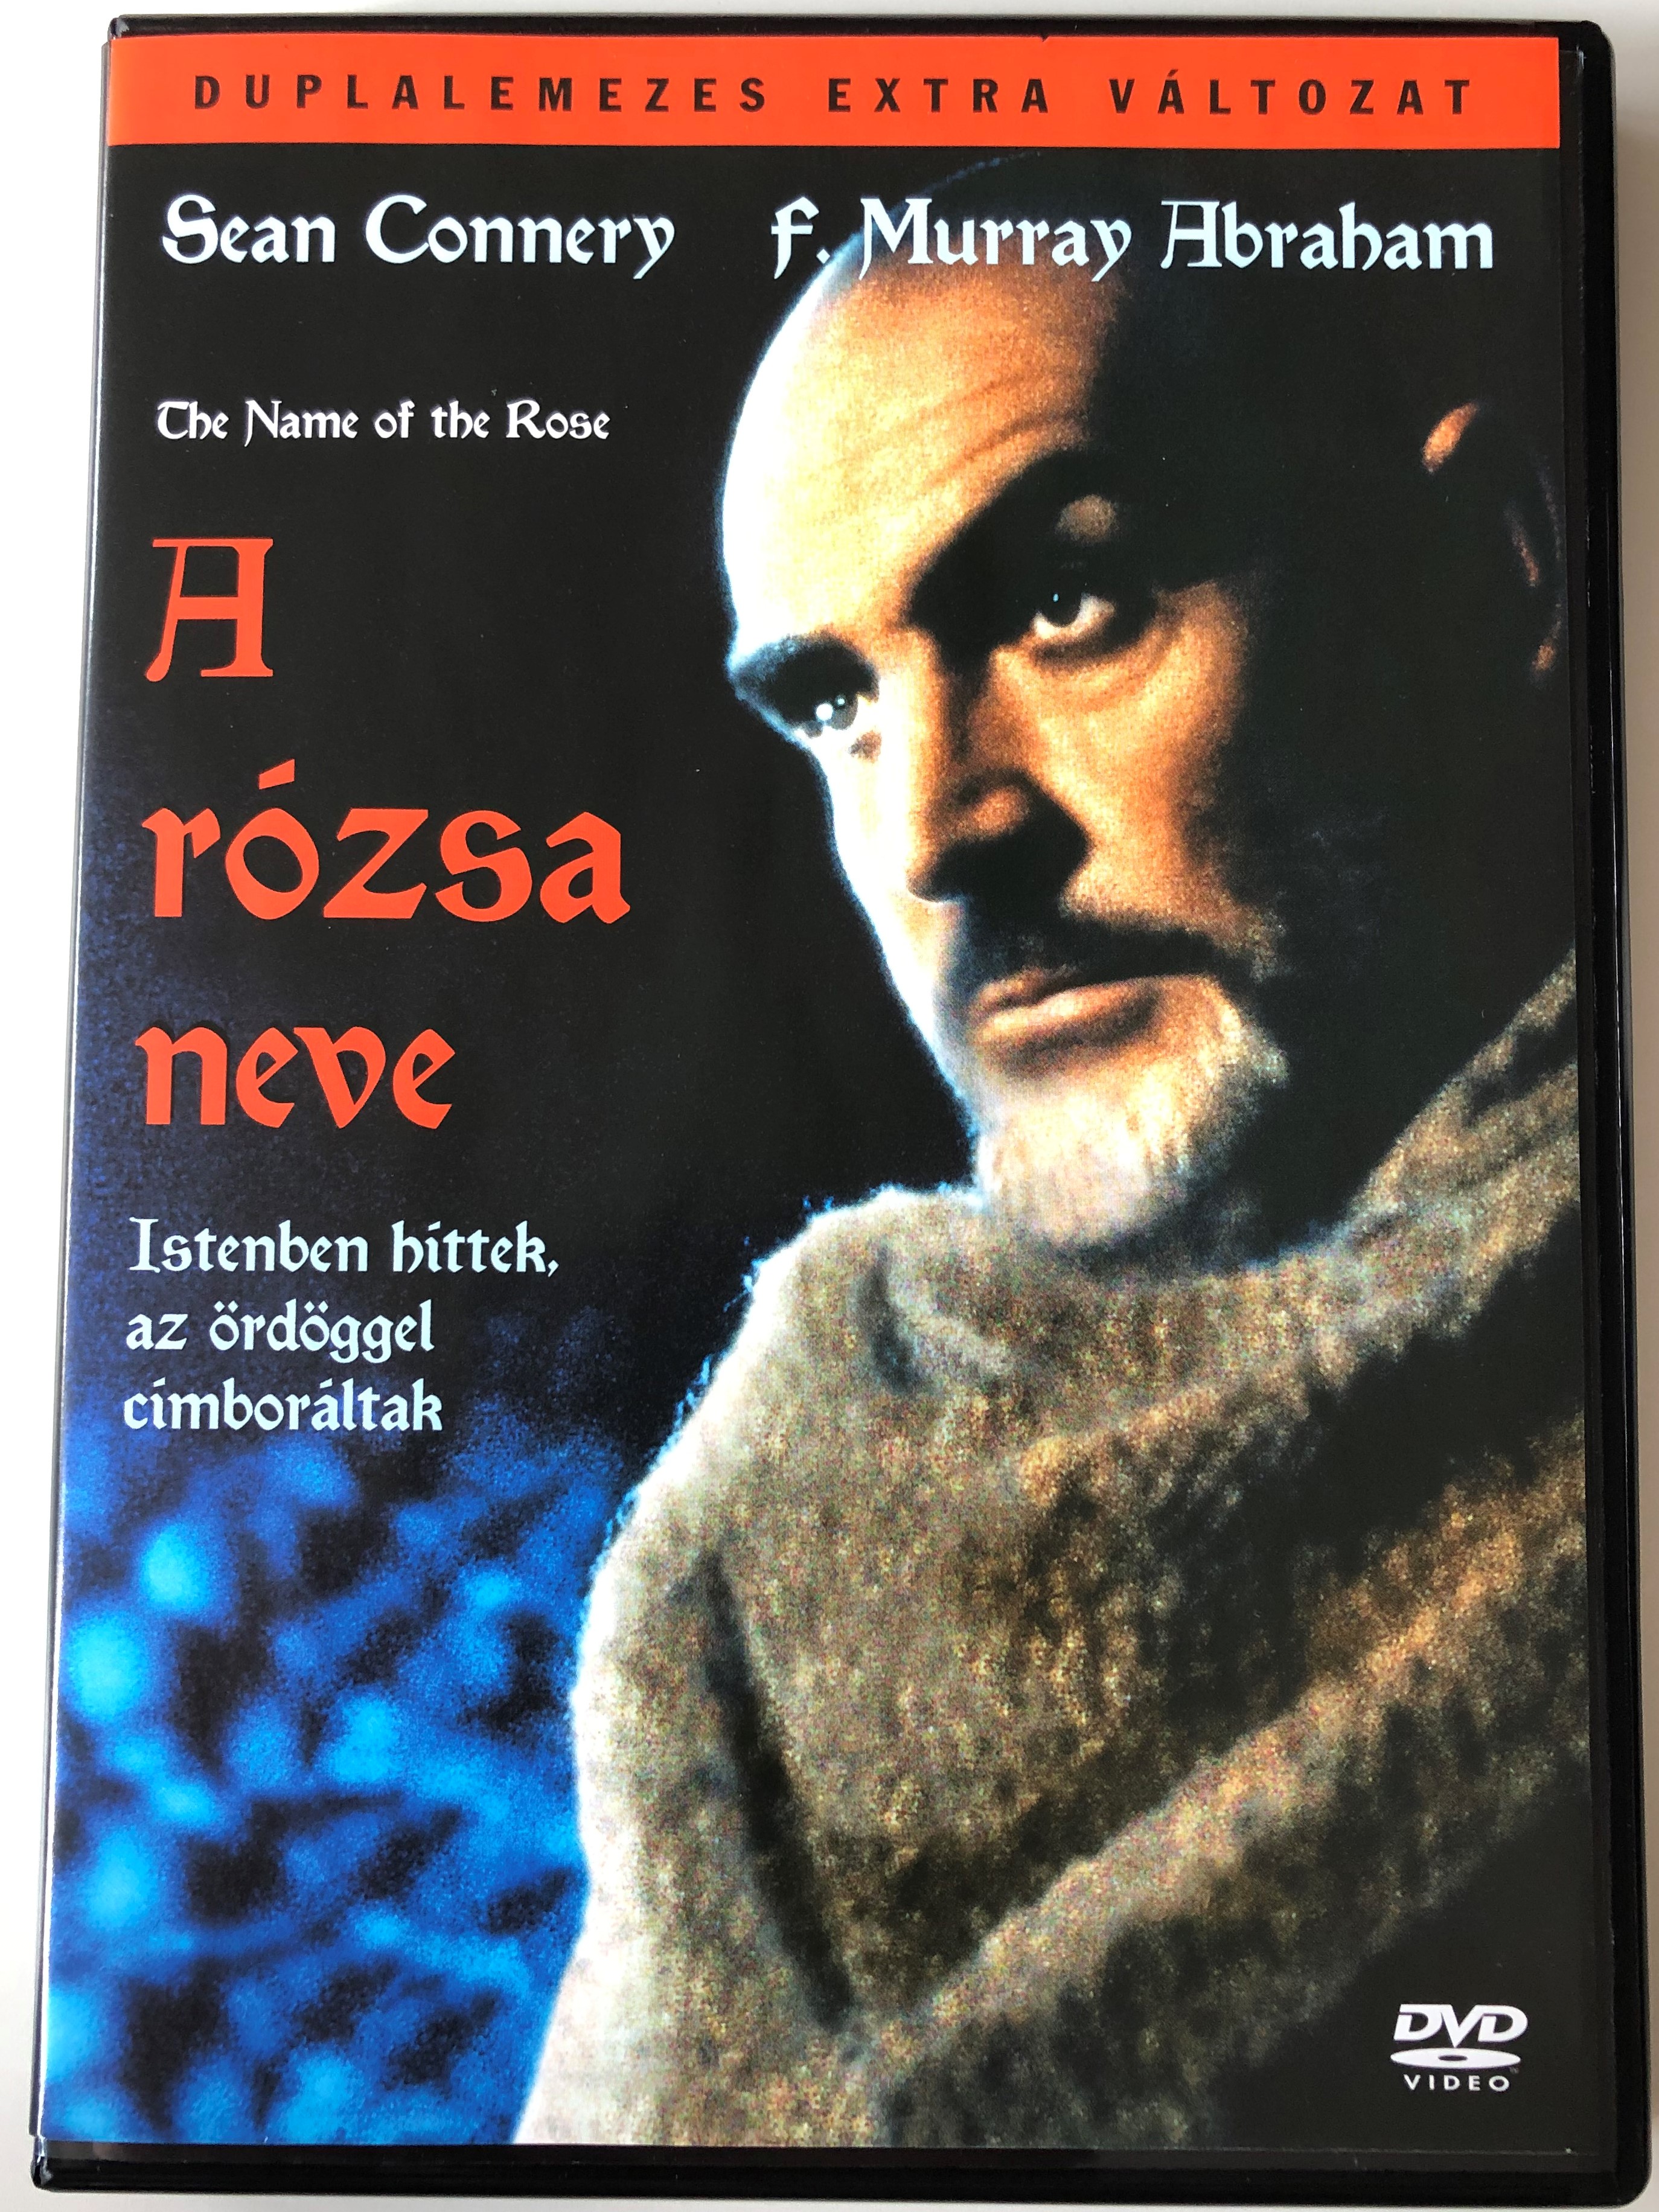 the-name-of-the-rose-a-r-zsa-neve-2-dvd-1986-1.jpg